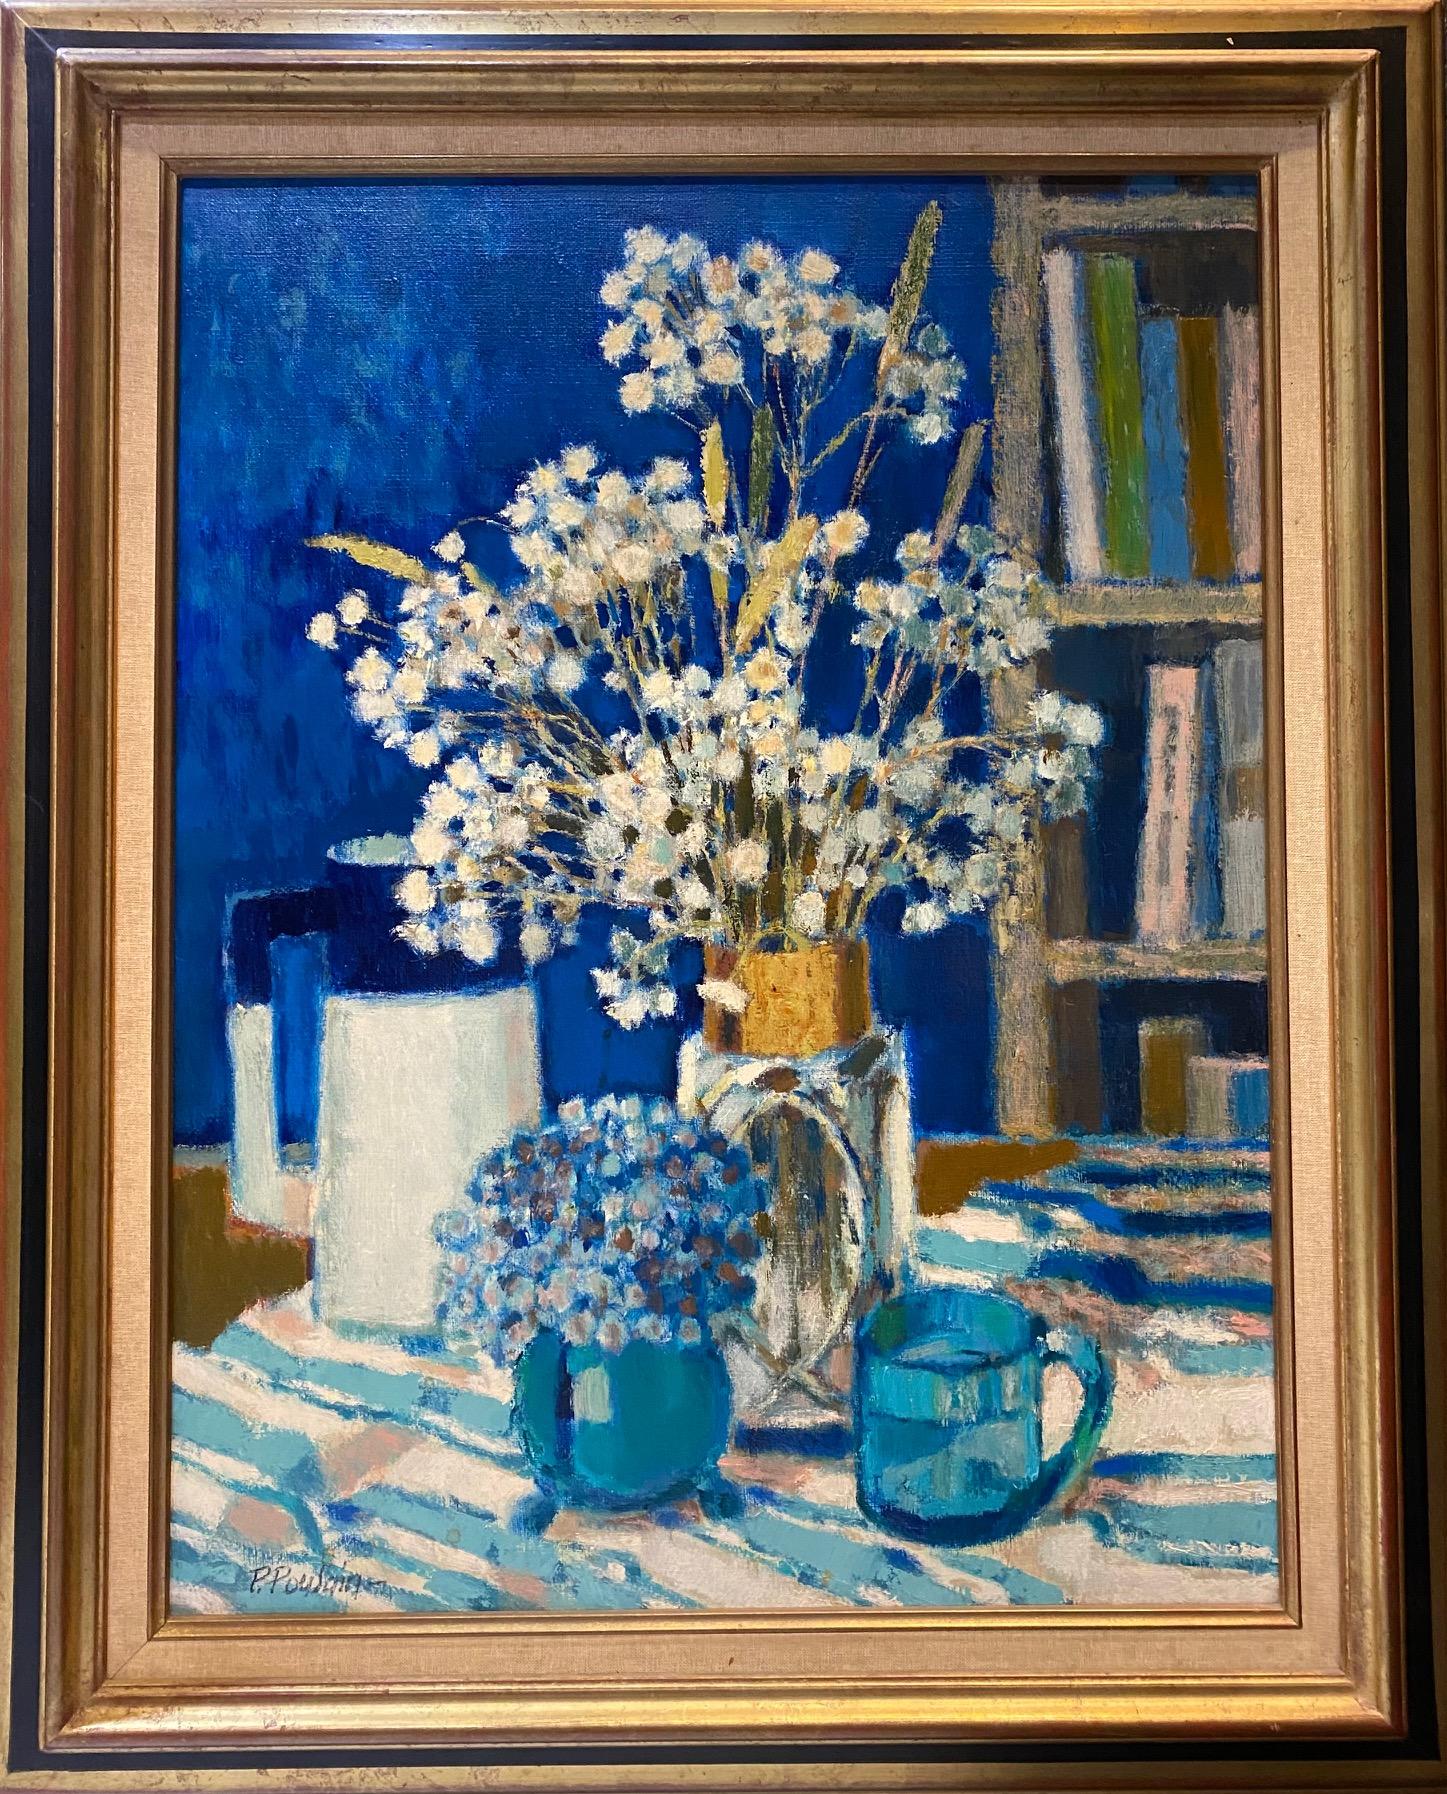 Harmony in blue by Pierre Poulain - Oil on canvas 50x65 cm For Sale 3